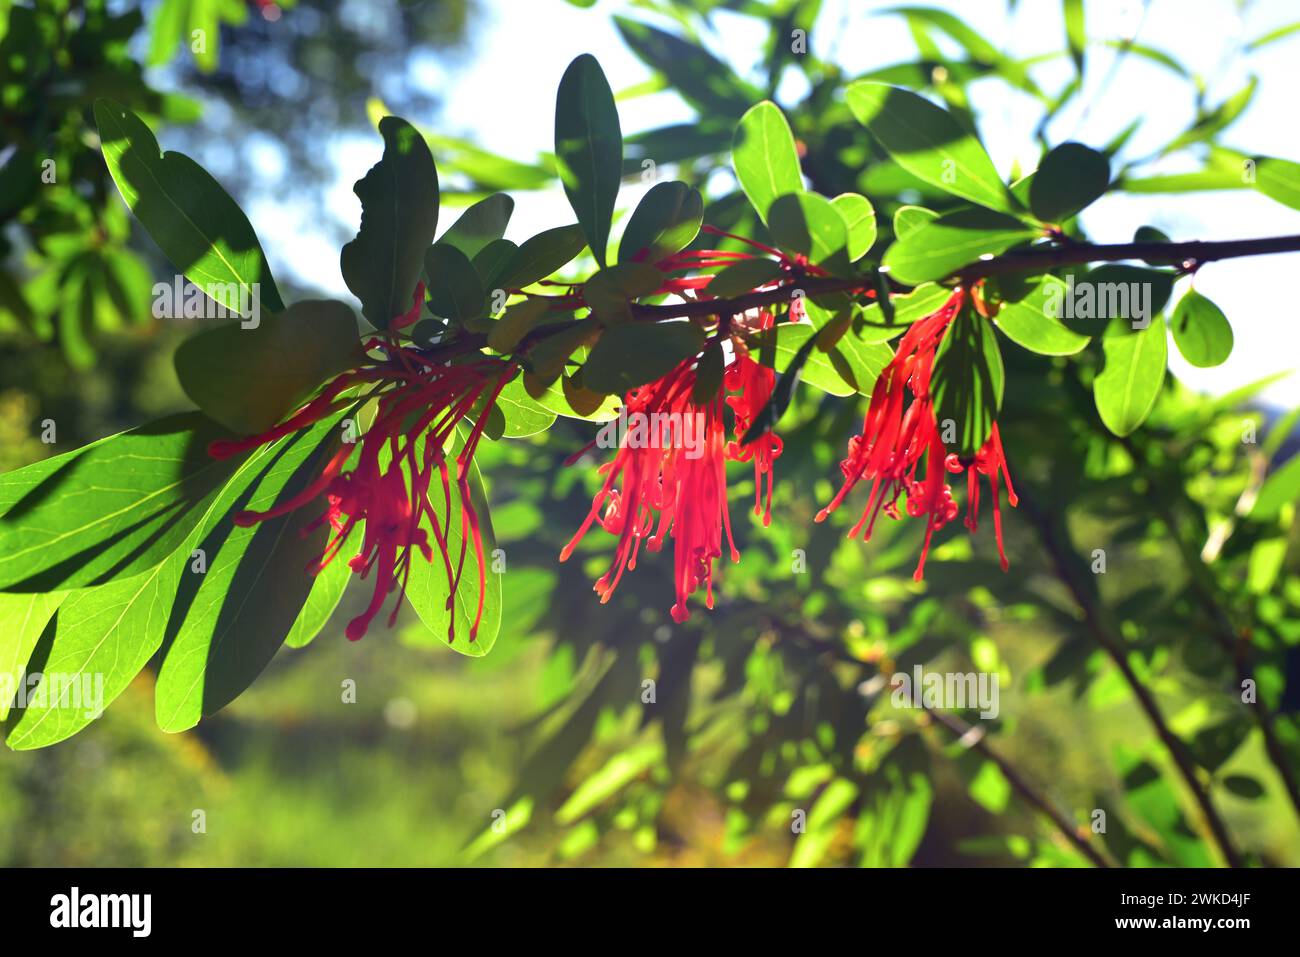 Notro or Chilean firetree (Embothrium coccineum) is a small evergreen tree native to temperate regions of Chile and Argentina. Flowers and leaves deta Stock Photo